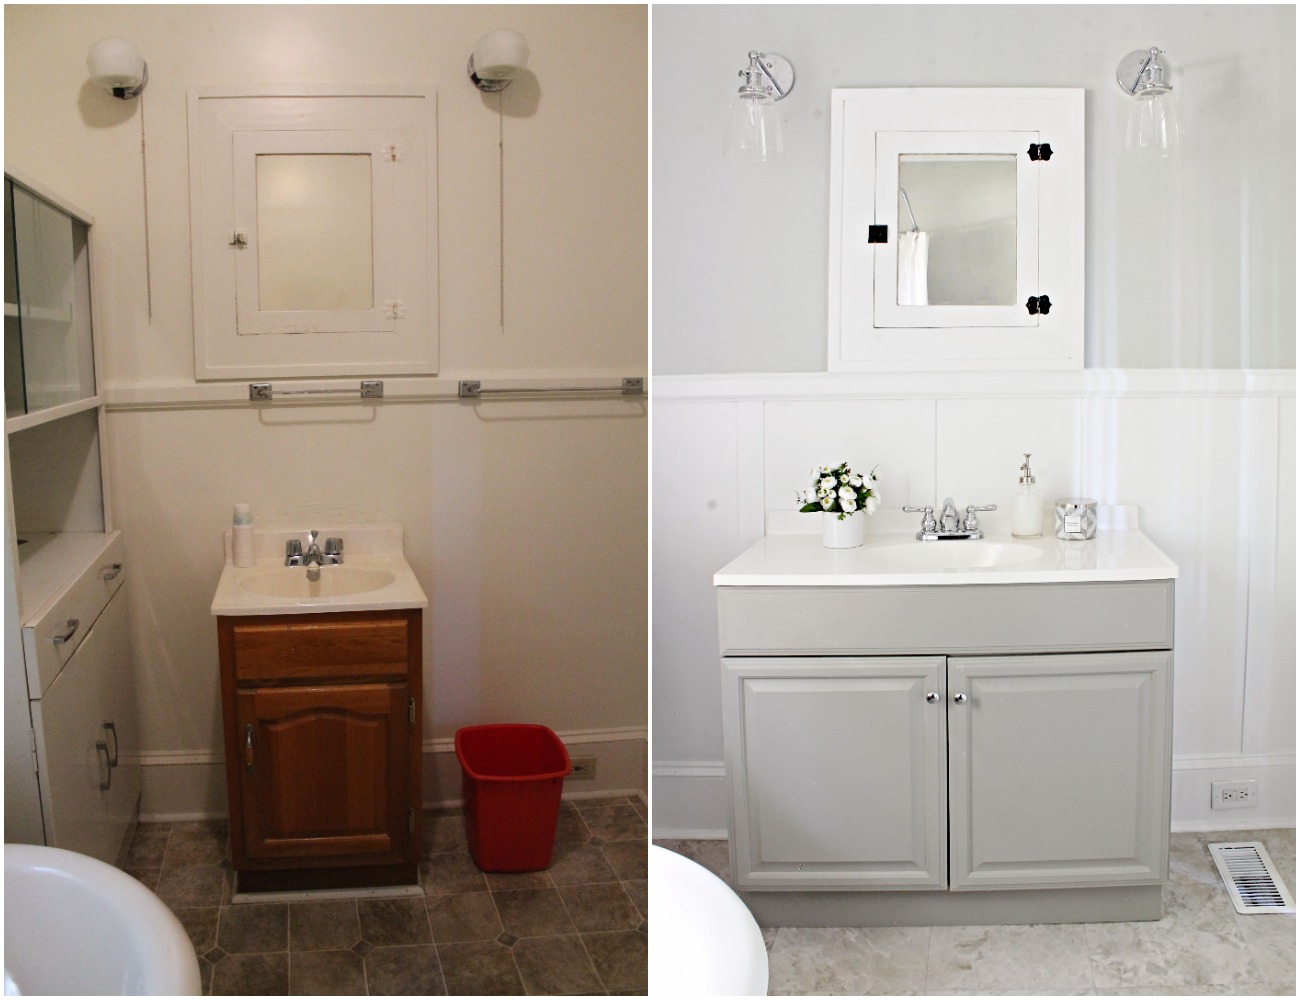 House Flipping Before and After - DIY BUDGET BATHROOM IDEAS (3).jpg